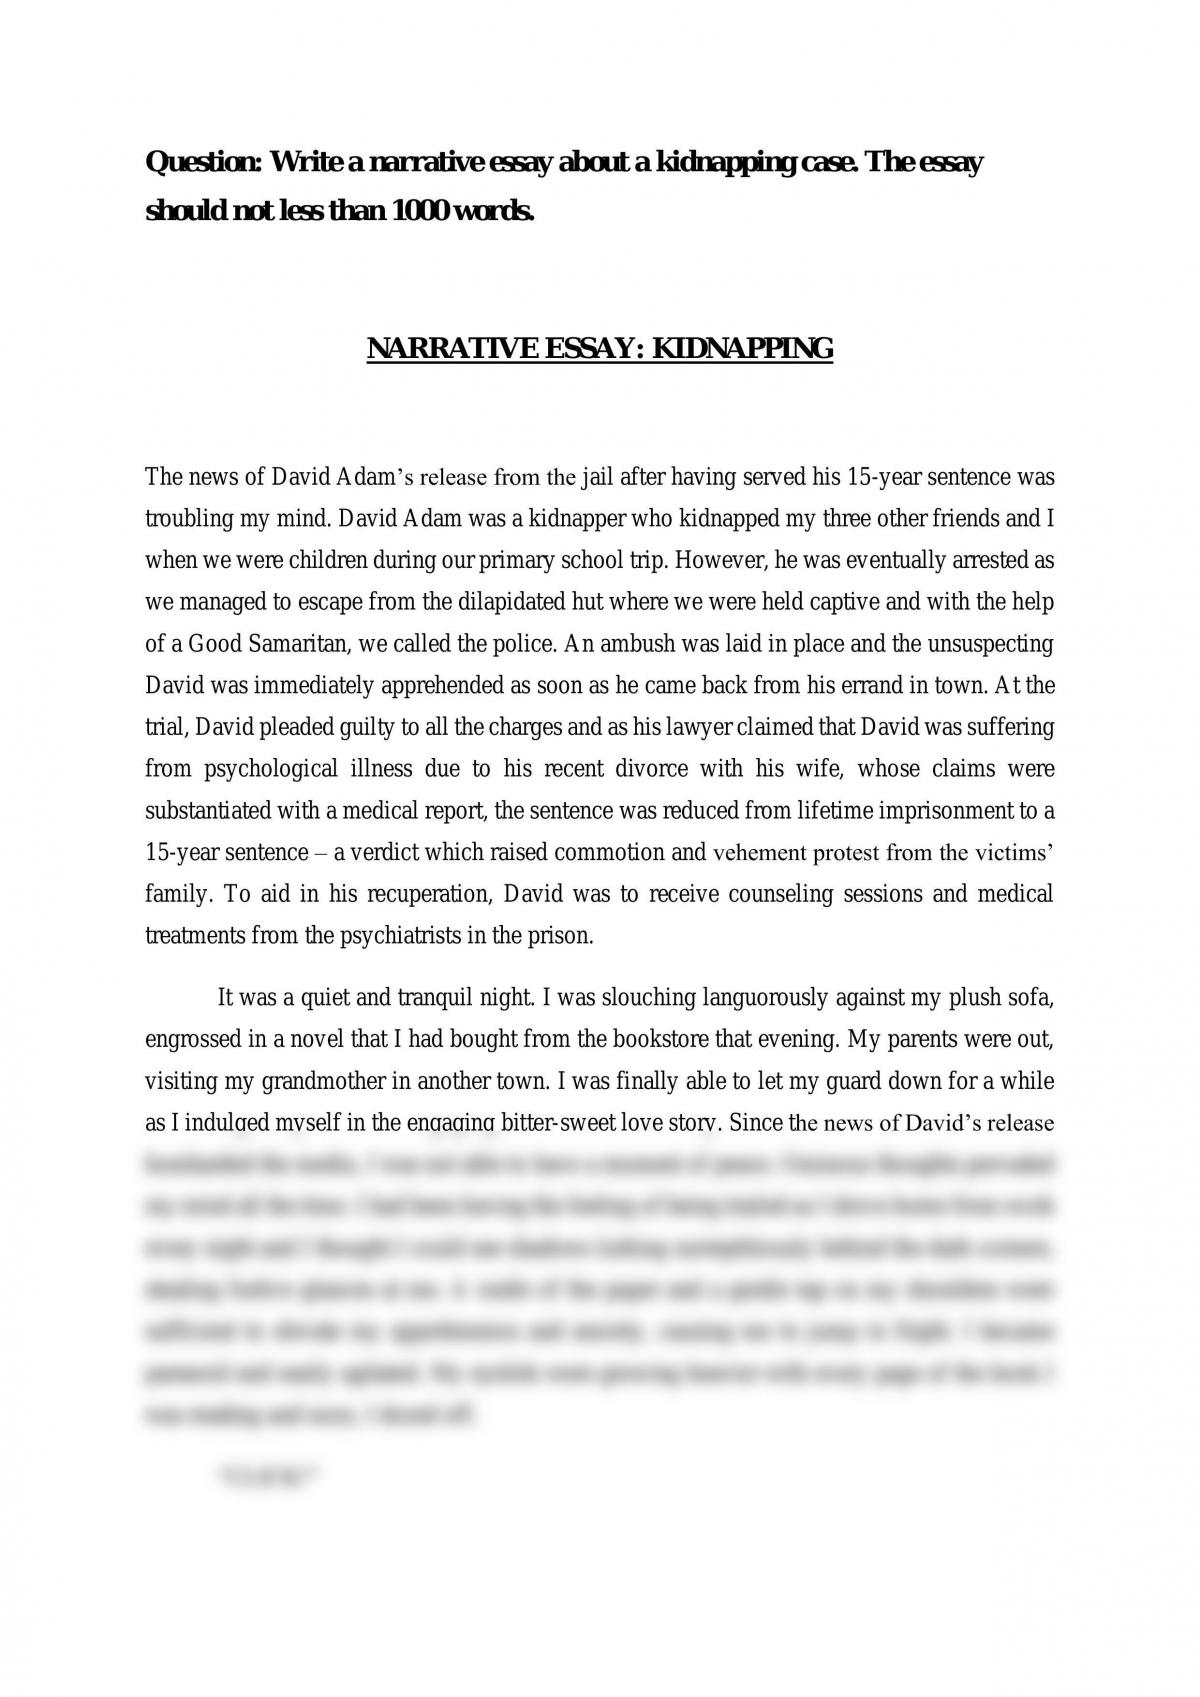 essay about kidnapping